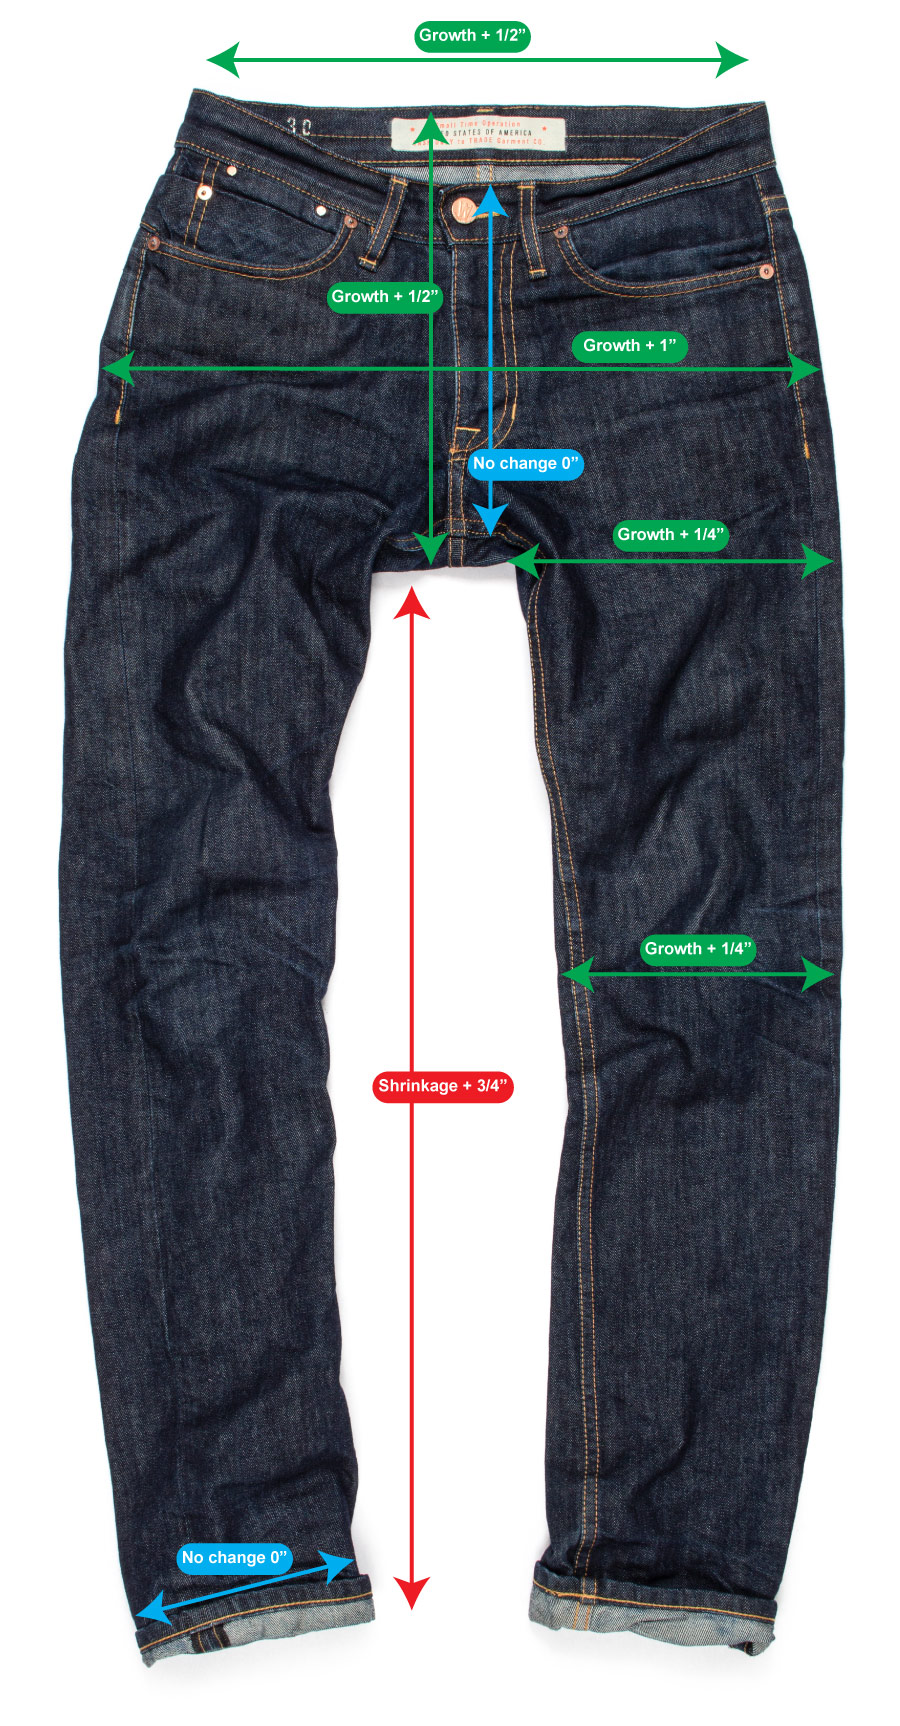 Measurements differences between new and worn raw denim jeans